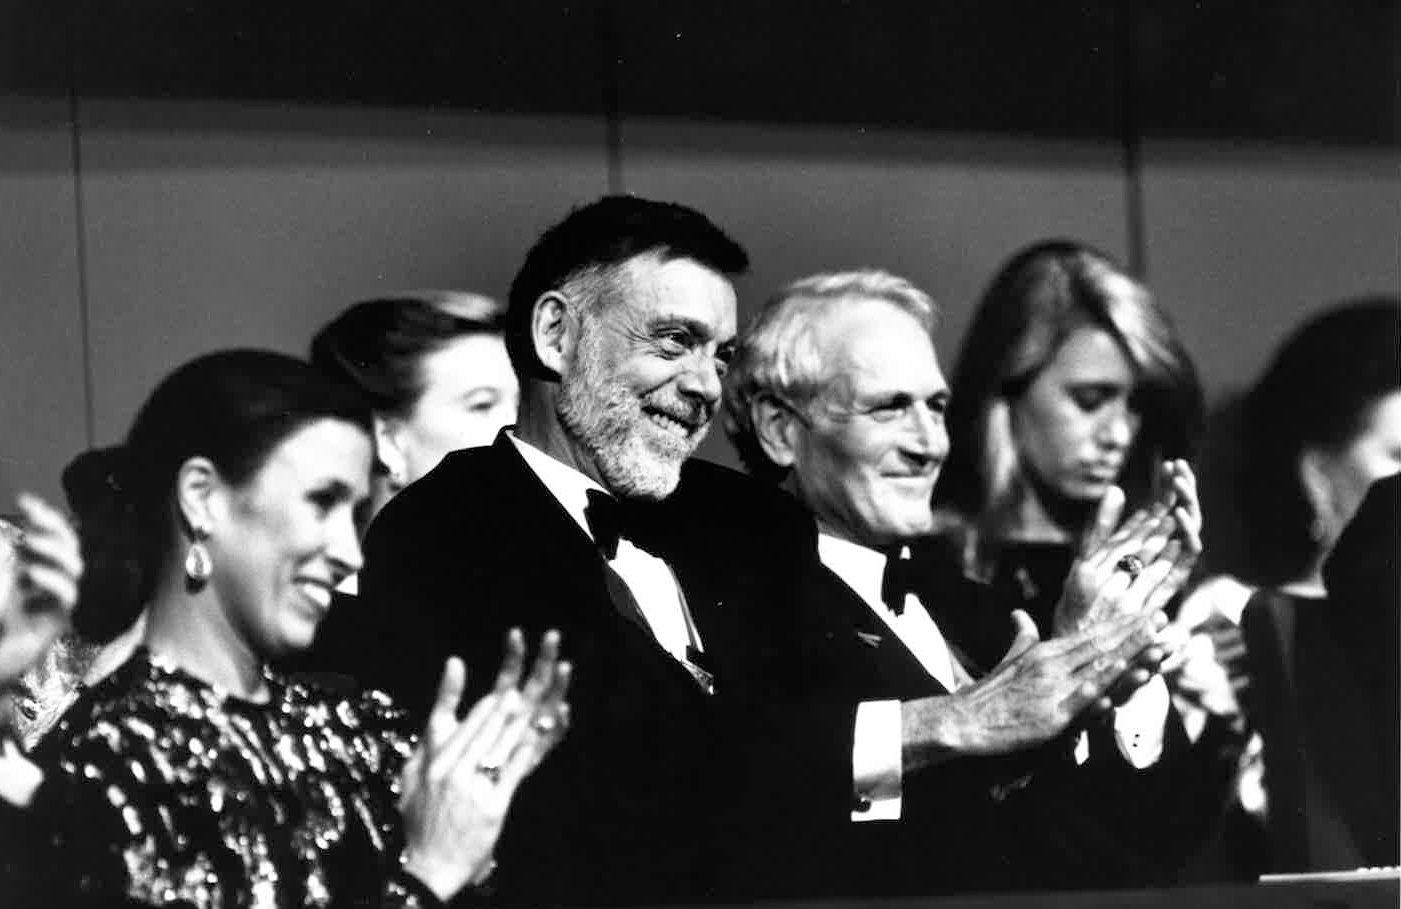 In a black and white archival photo, Paul Taylor sits in a tuxedo in an audience, smiling broadly as he applauds.